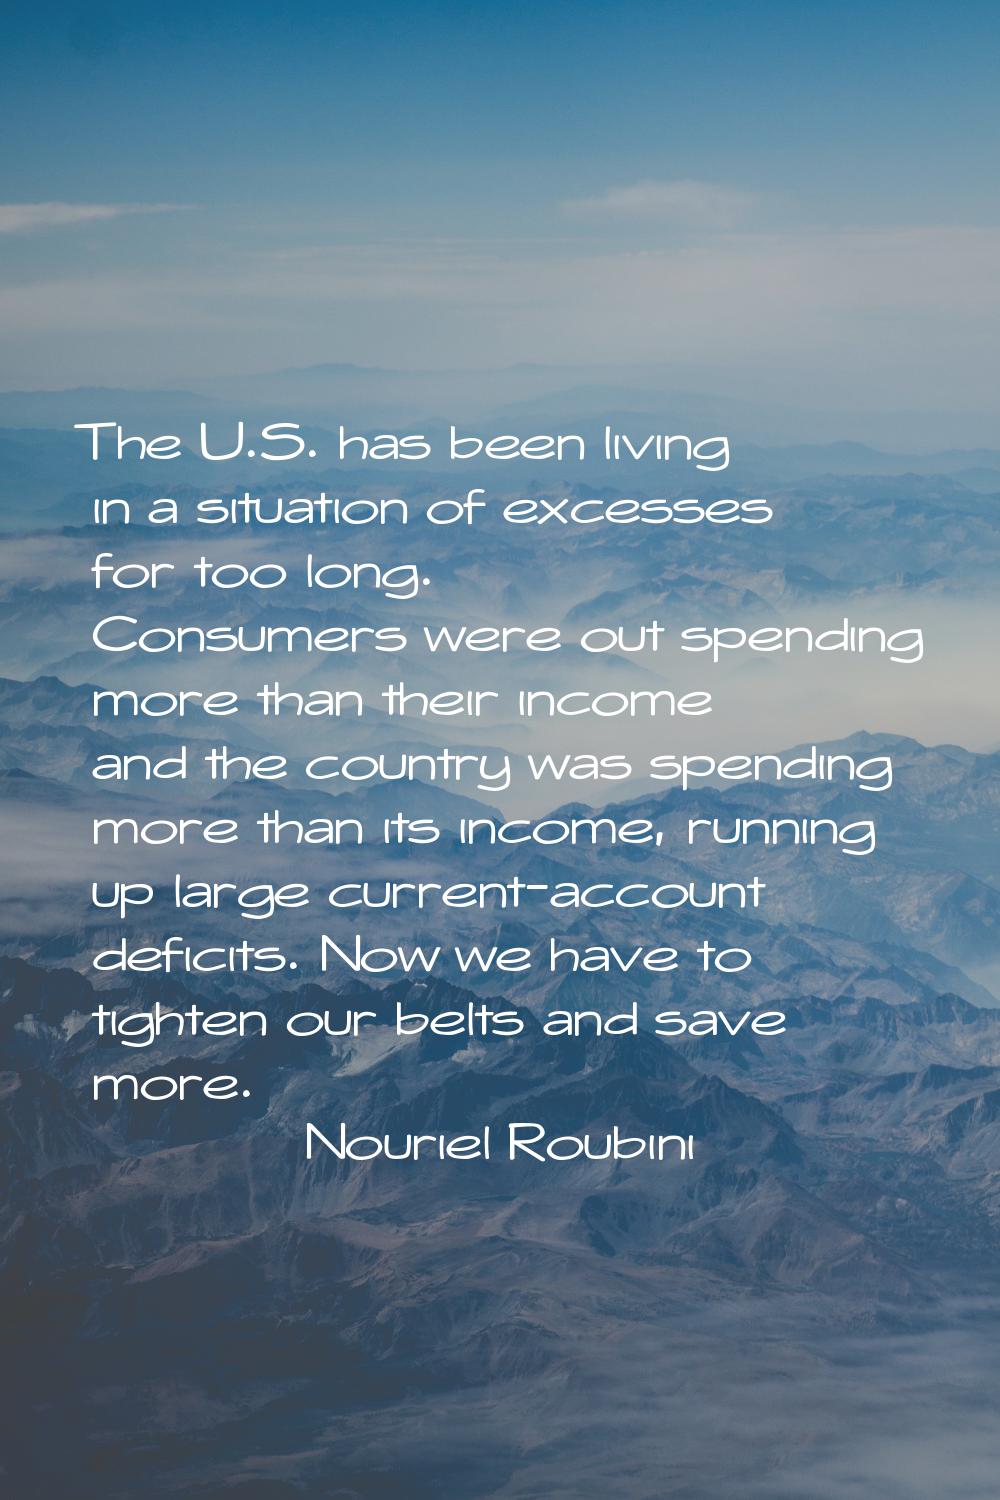 The U.S. has been living in a situation of excesses for too long. Consumers were out spending more 